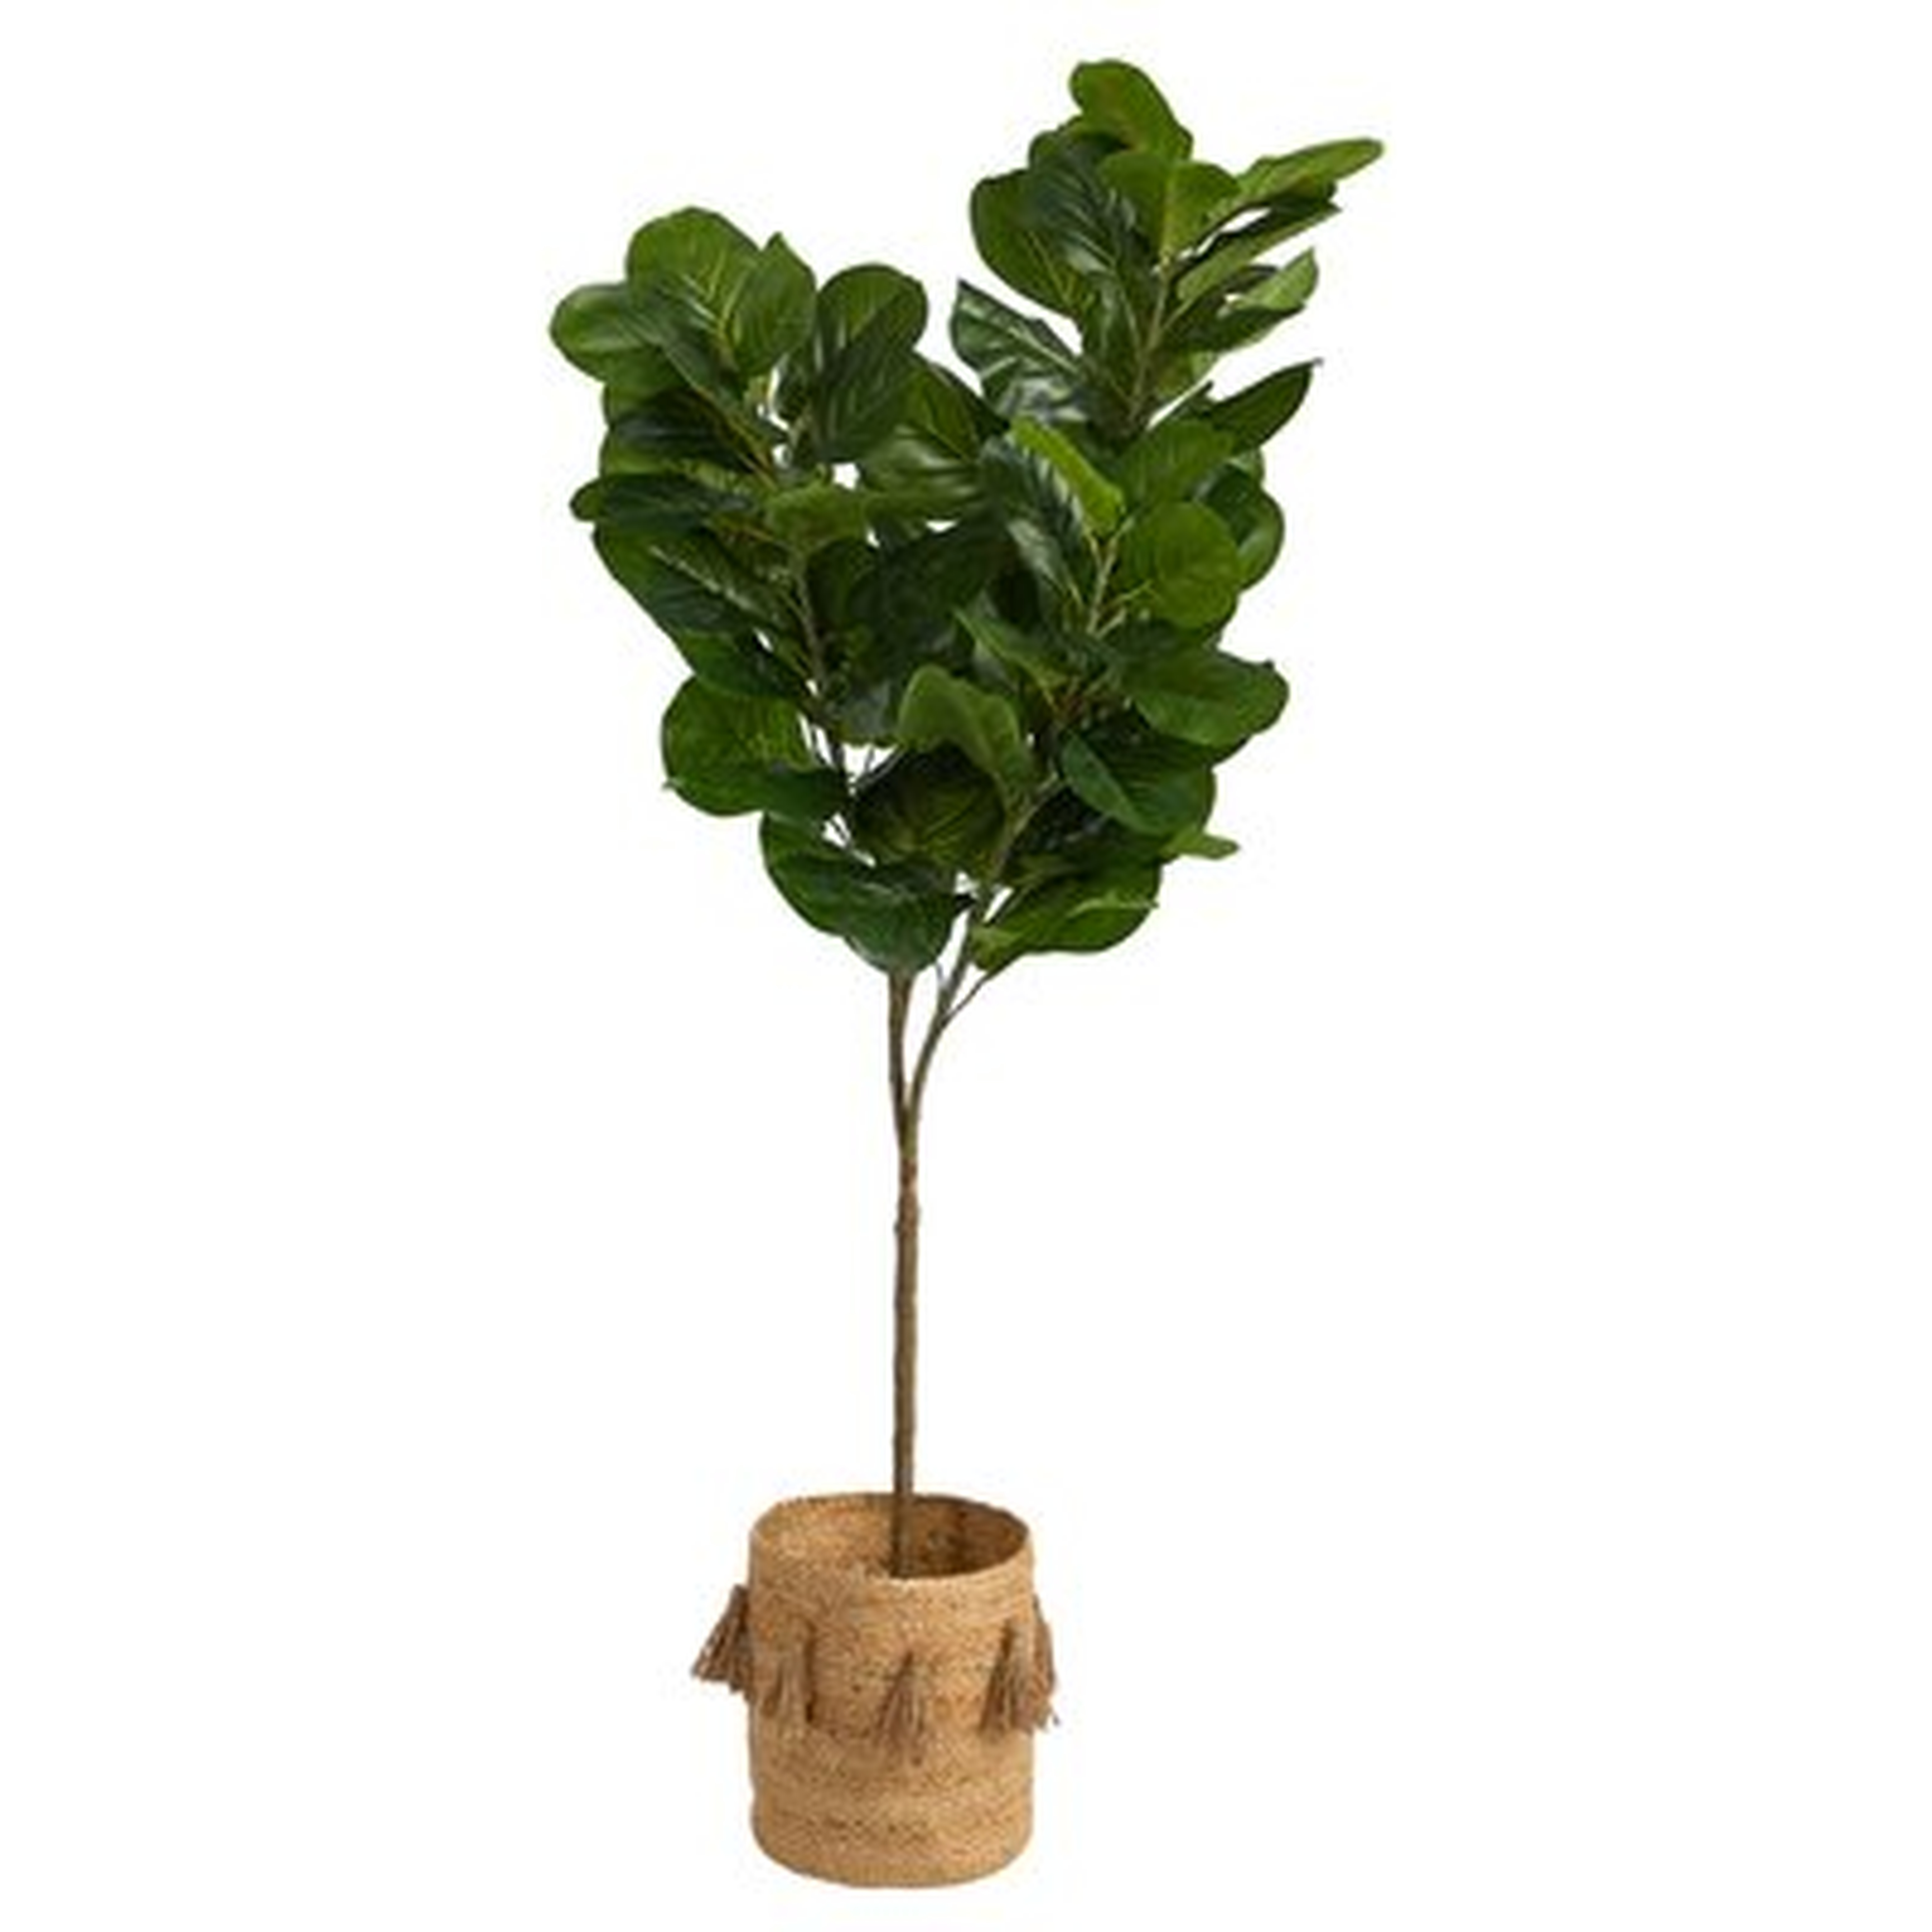 6Ft. Fiddle Leaf Fig Artificial Tree In Handmade Natural Jute Planter With Tassels - Wayfair